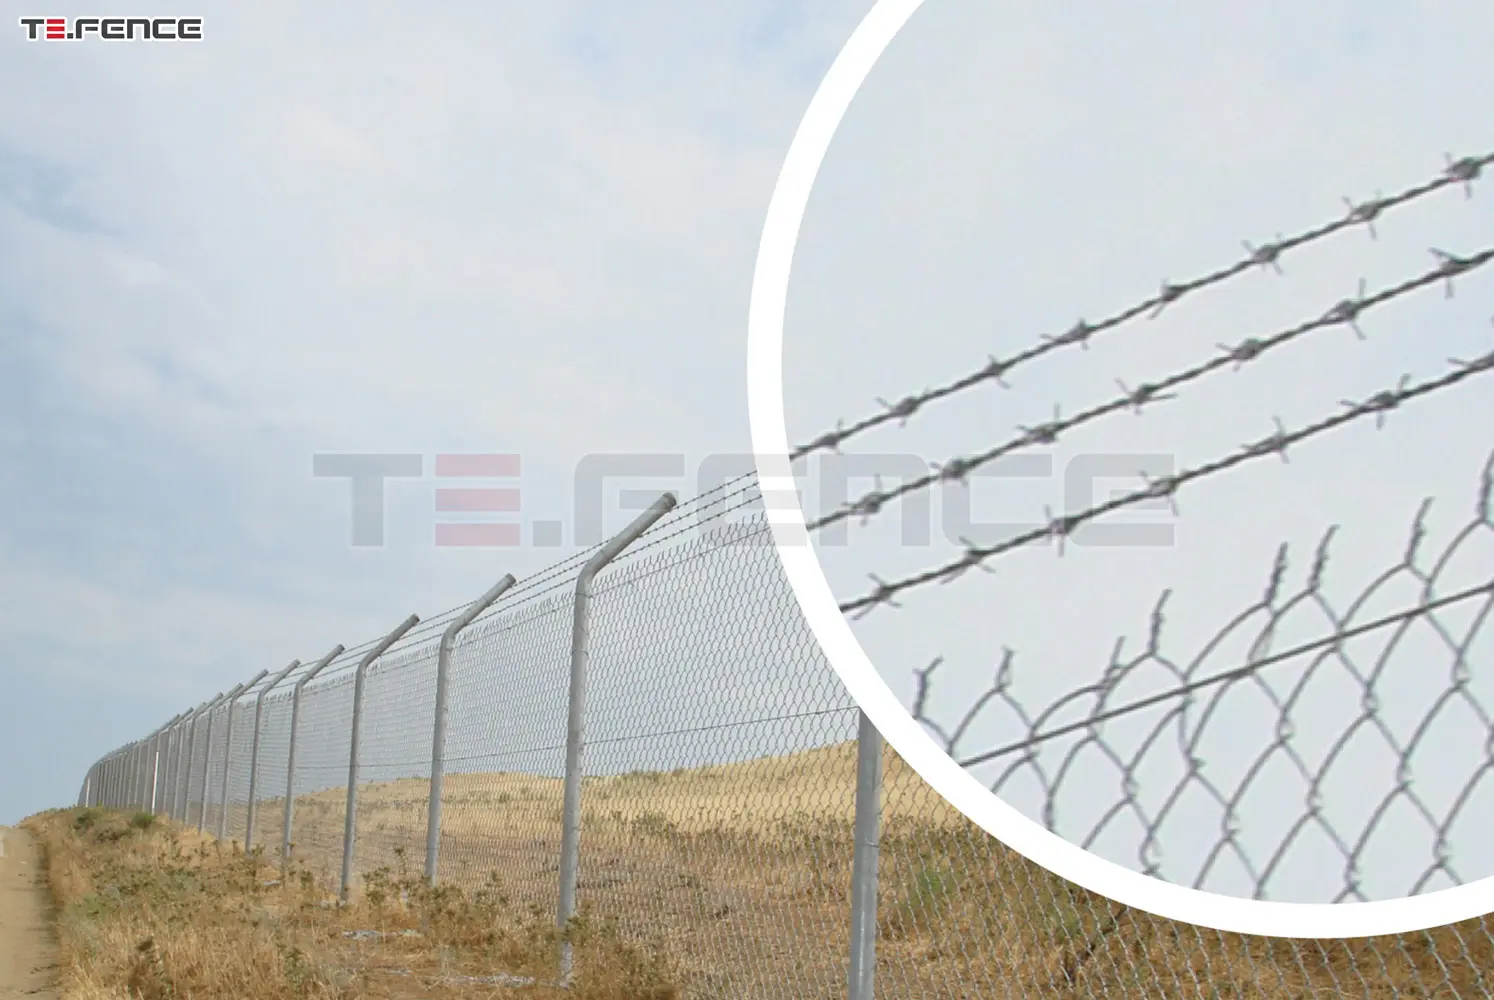 Barbed Wire ǀ Security Fence ǀ Te-Fence Turkey